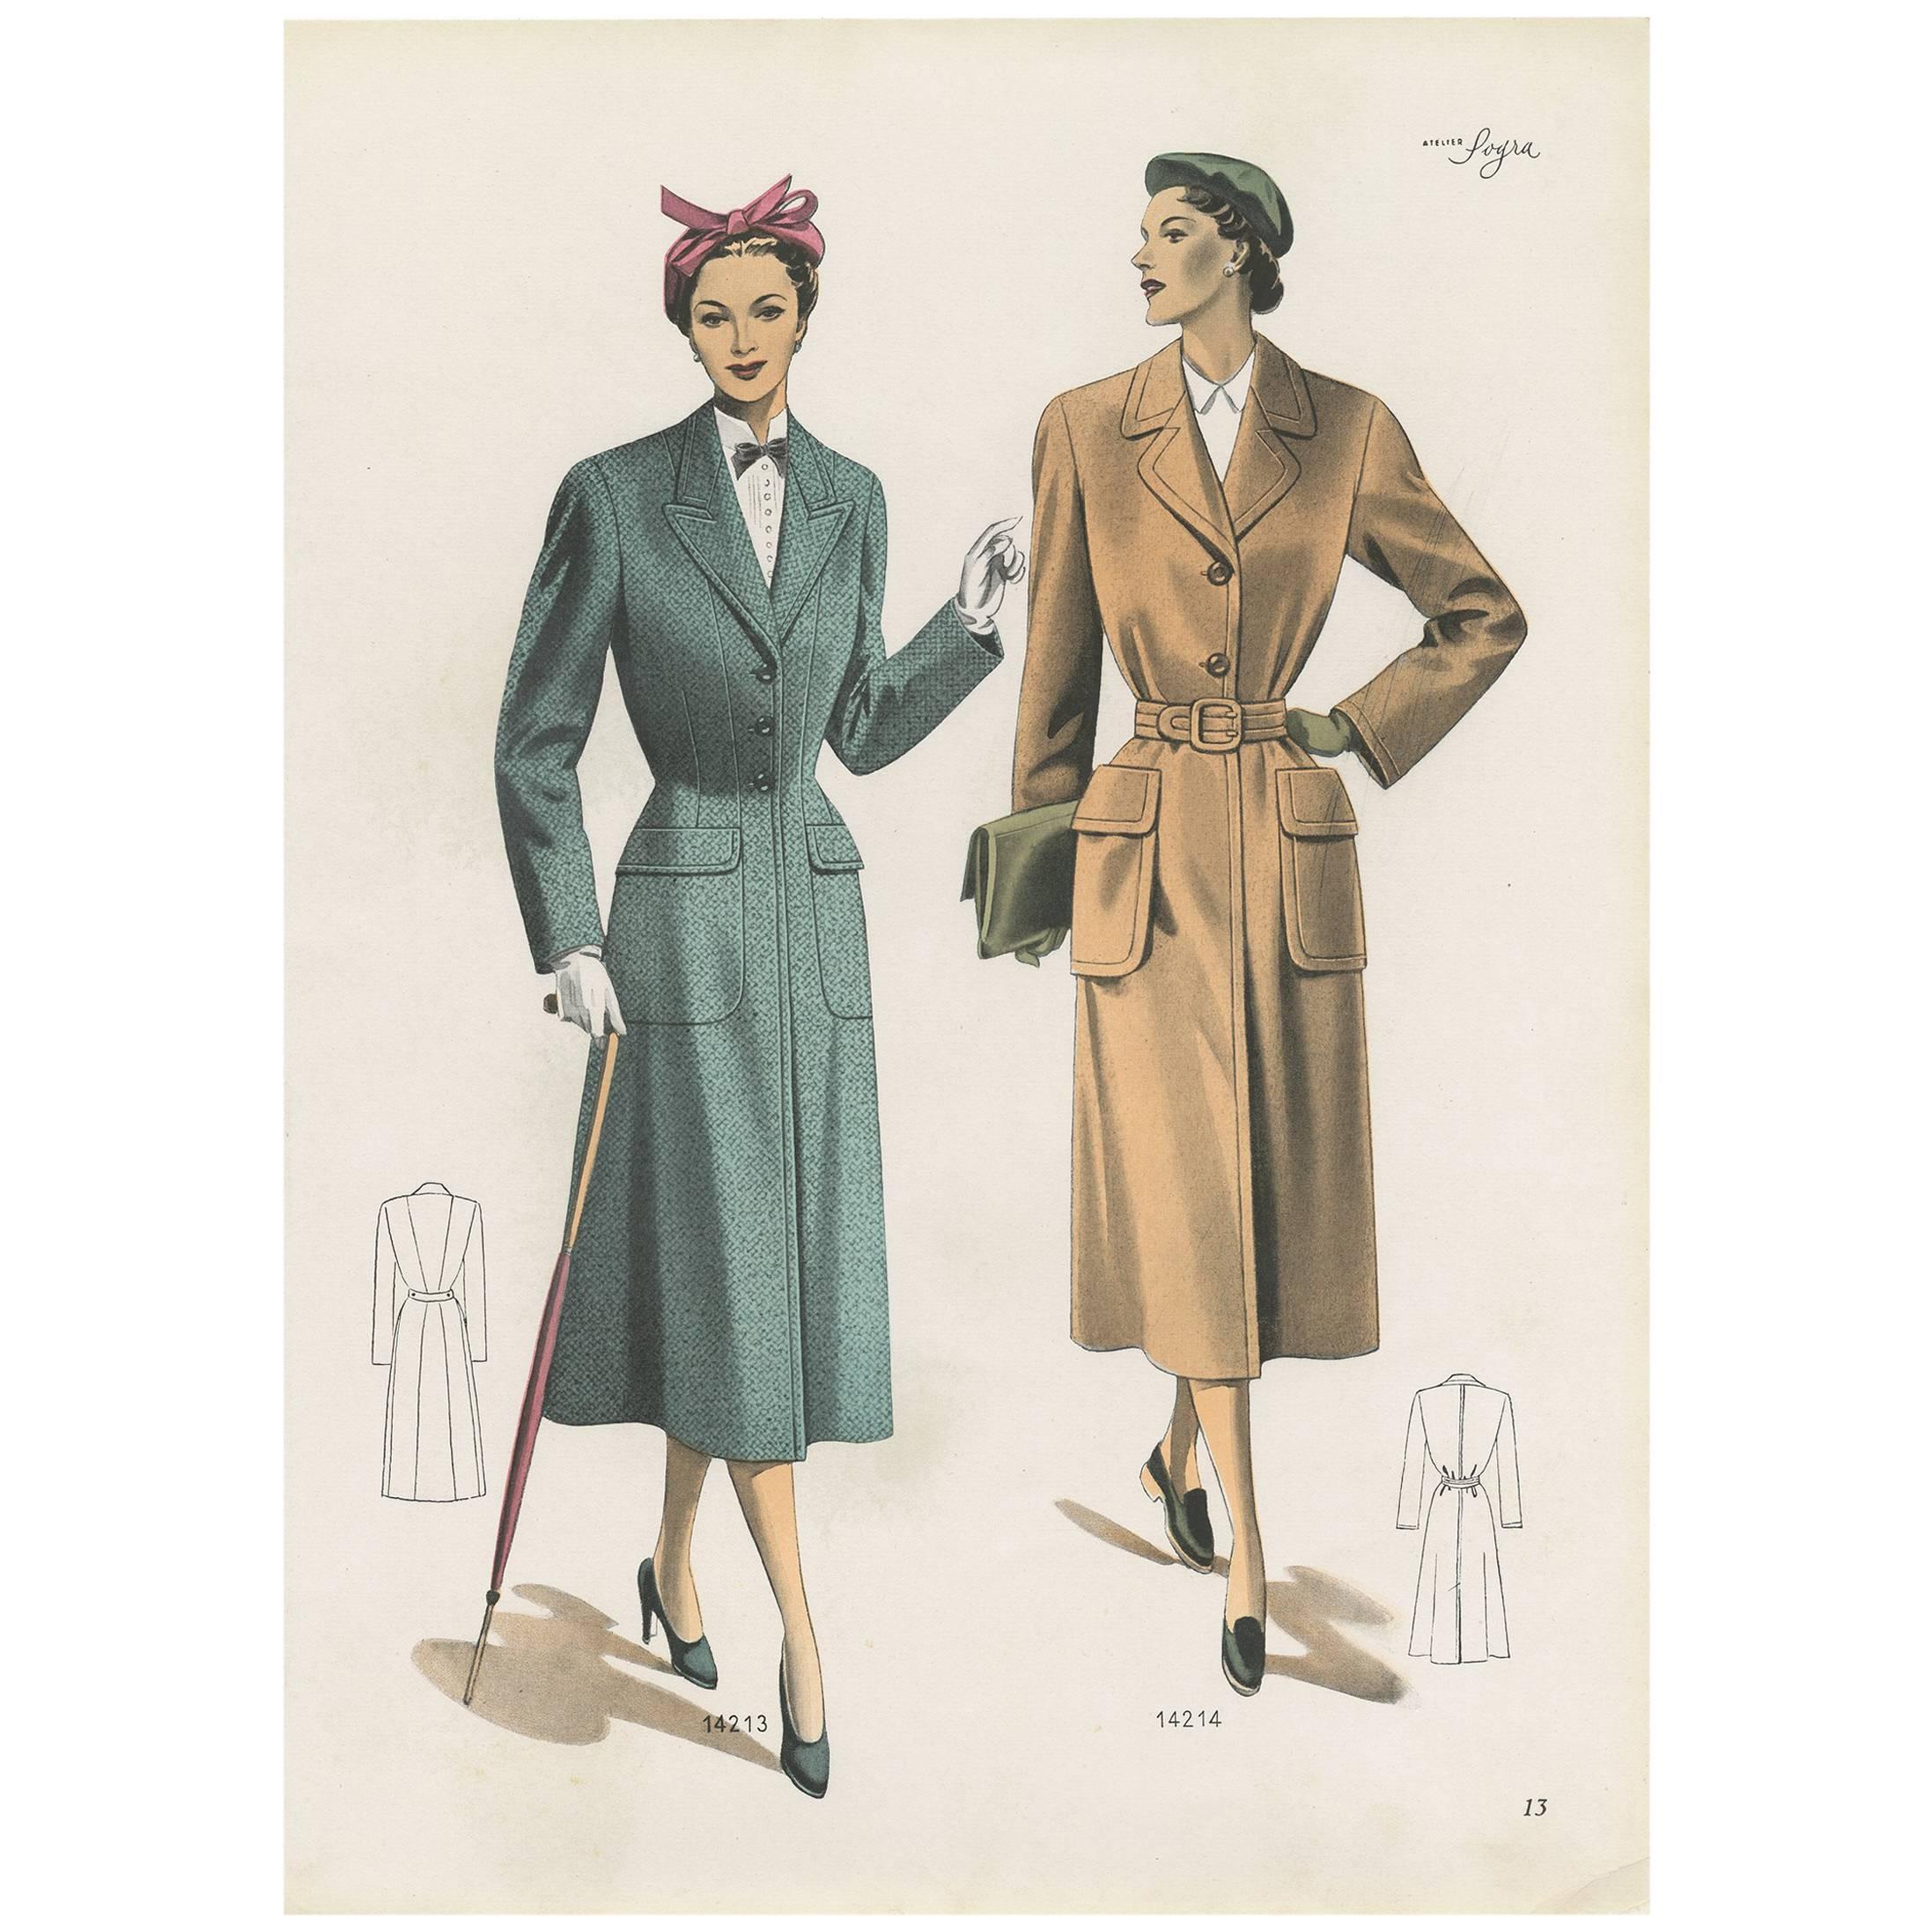 Vintage Fashion Print ‘Pl. 14213’ Published in Ladies Styles, 1951